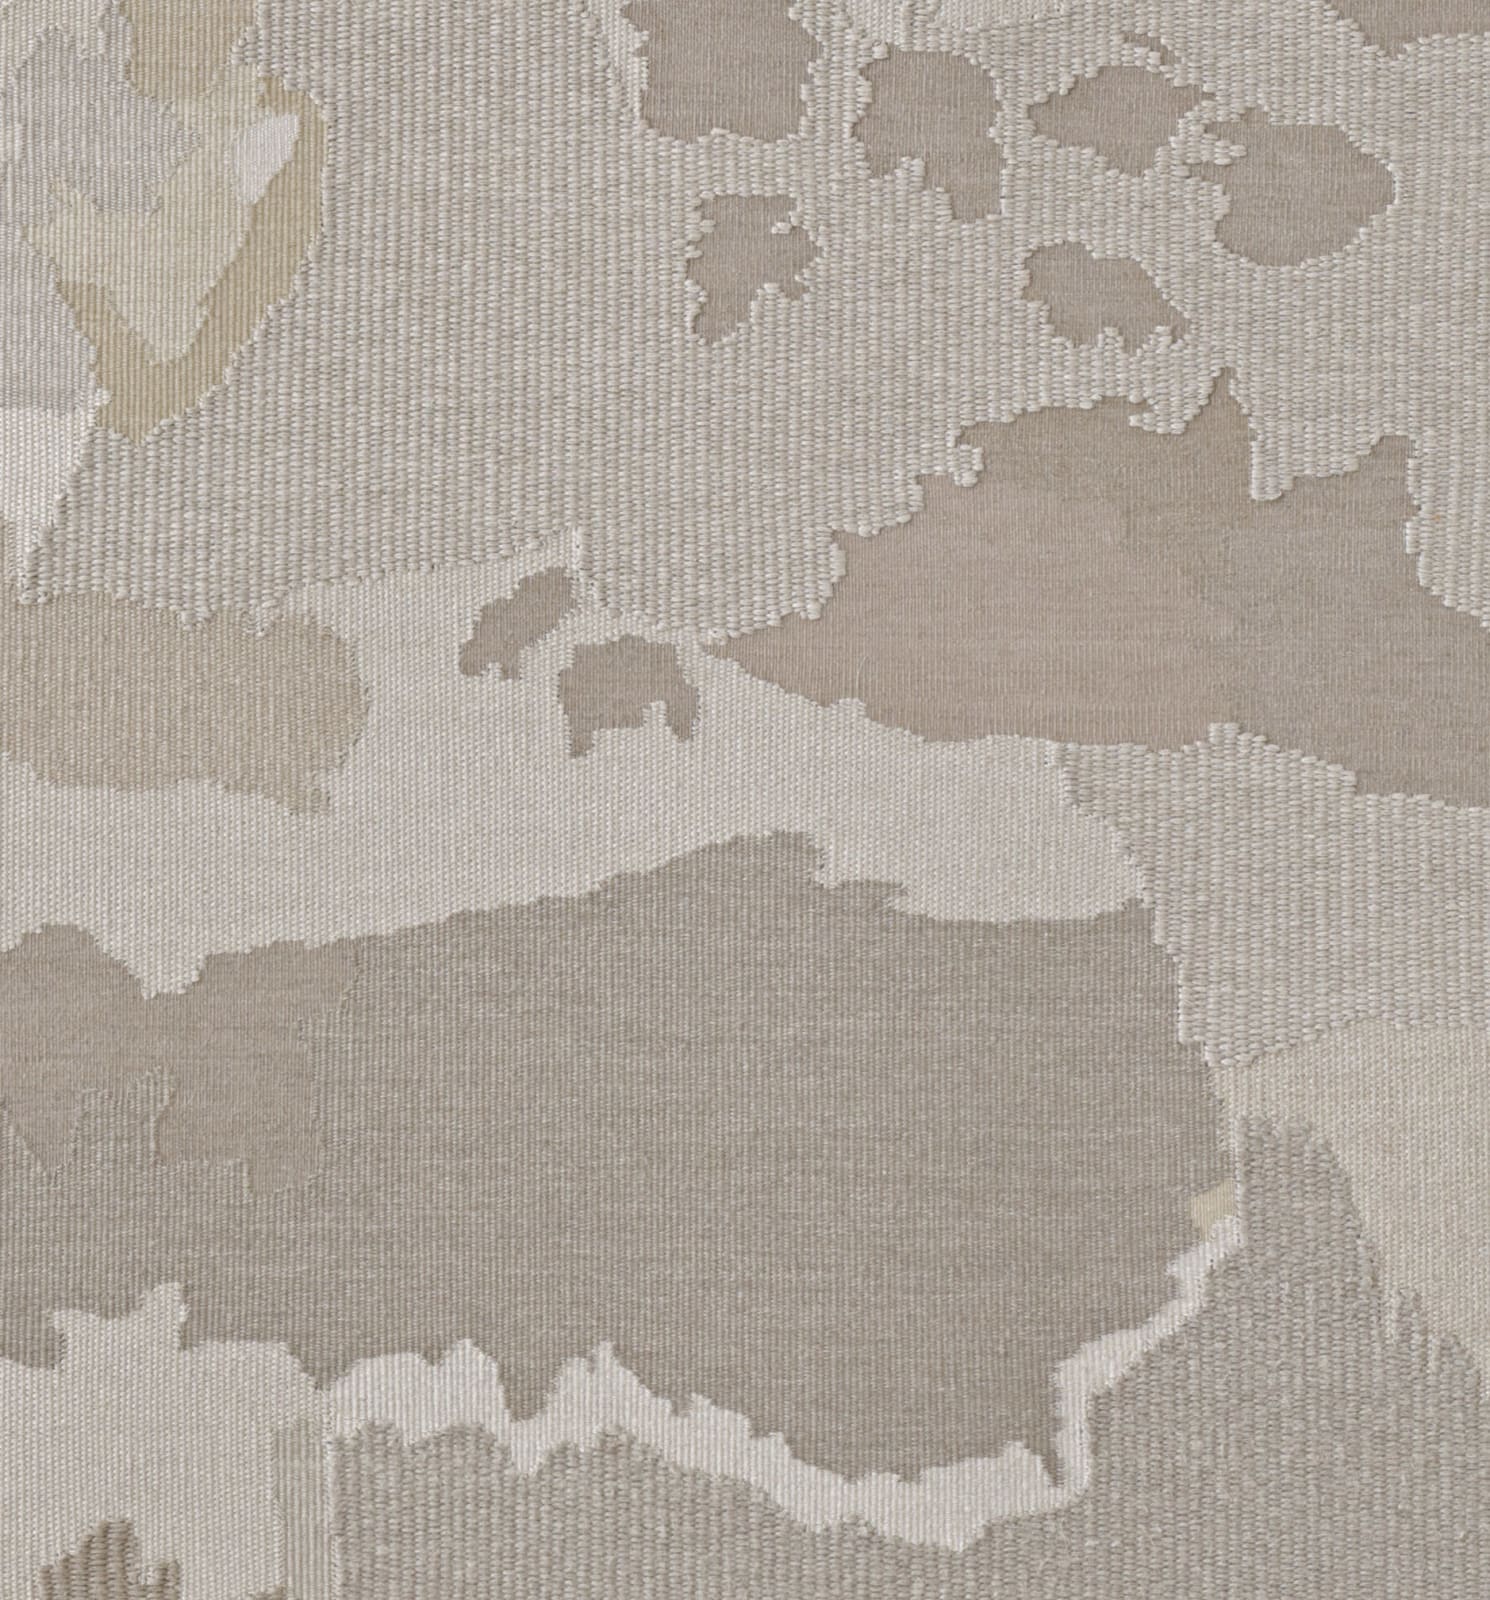 <p>Andreas Eriksson, <em>Weissensee No. 7</em>, 2018. Detail.</p><h3>"Territories of the finished tapestries might be distinguished by a particular knotted texture or the stands of long fibre sprouting from the surface. Andreas has described the tapestries as ‘existential landscapes’. We might also see them as a conceptual extension of painting in which the picture migrates to the canvas itself." </h3><p><strong>- Hettie Judah on Andreas Eriksson, 2020</strong></p>